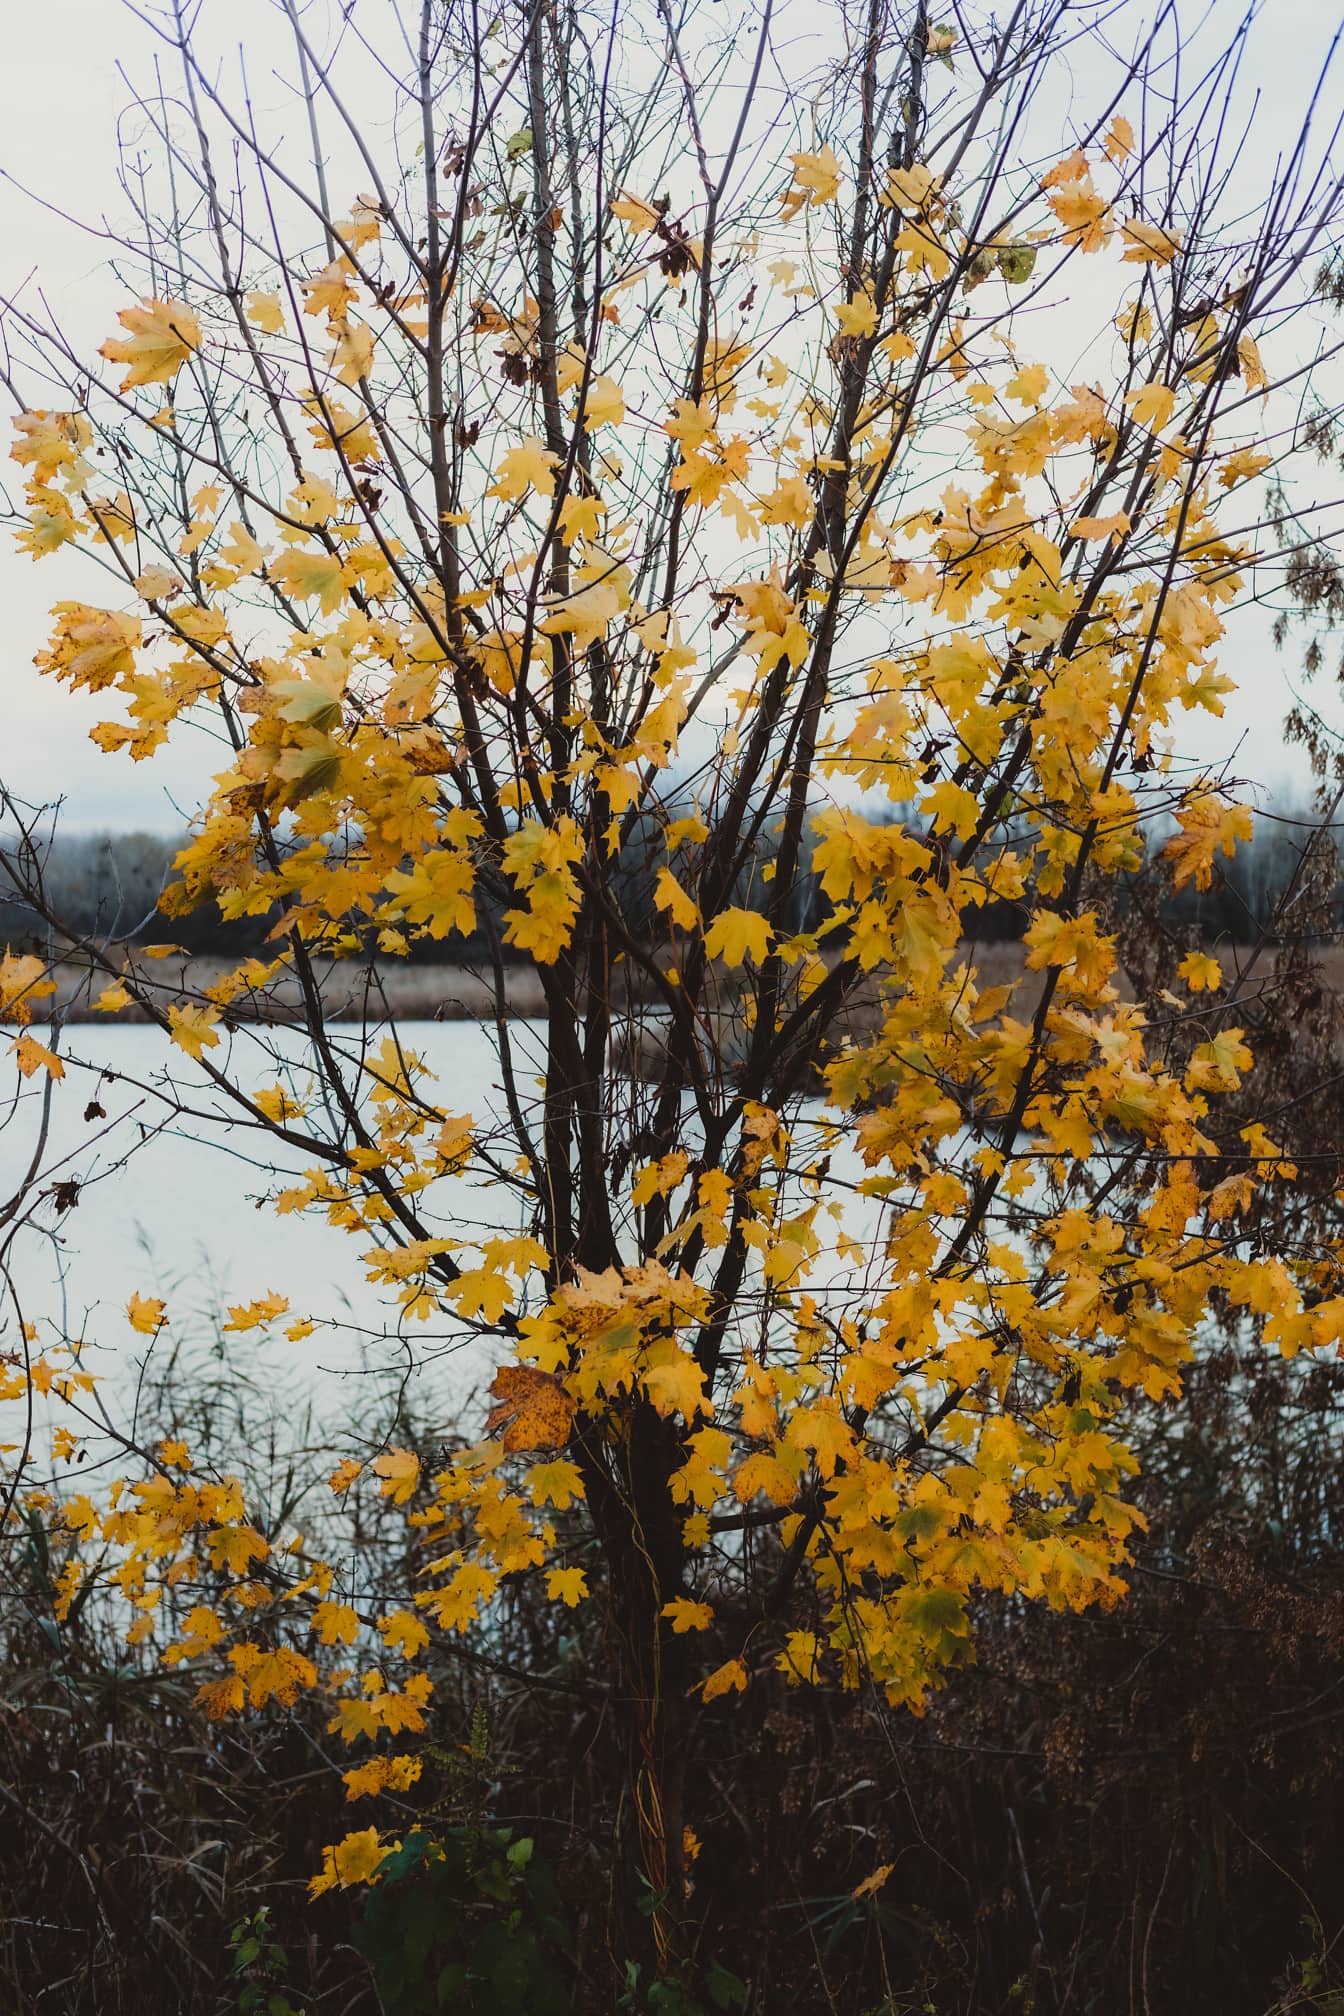 Yellowish brown leaves on tree branchlets in autumn season